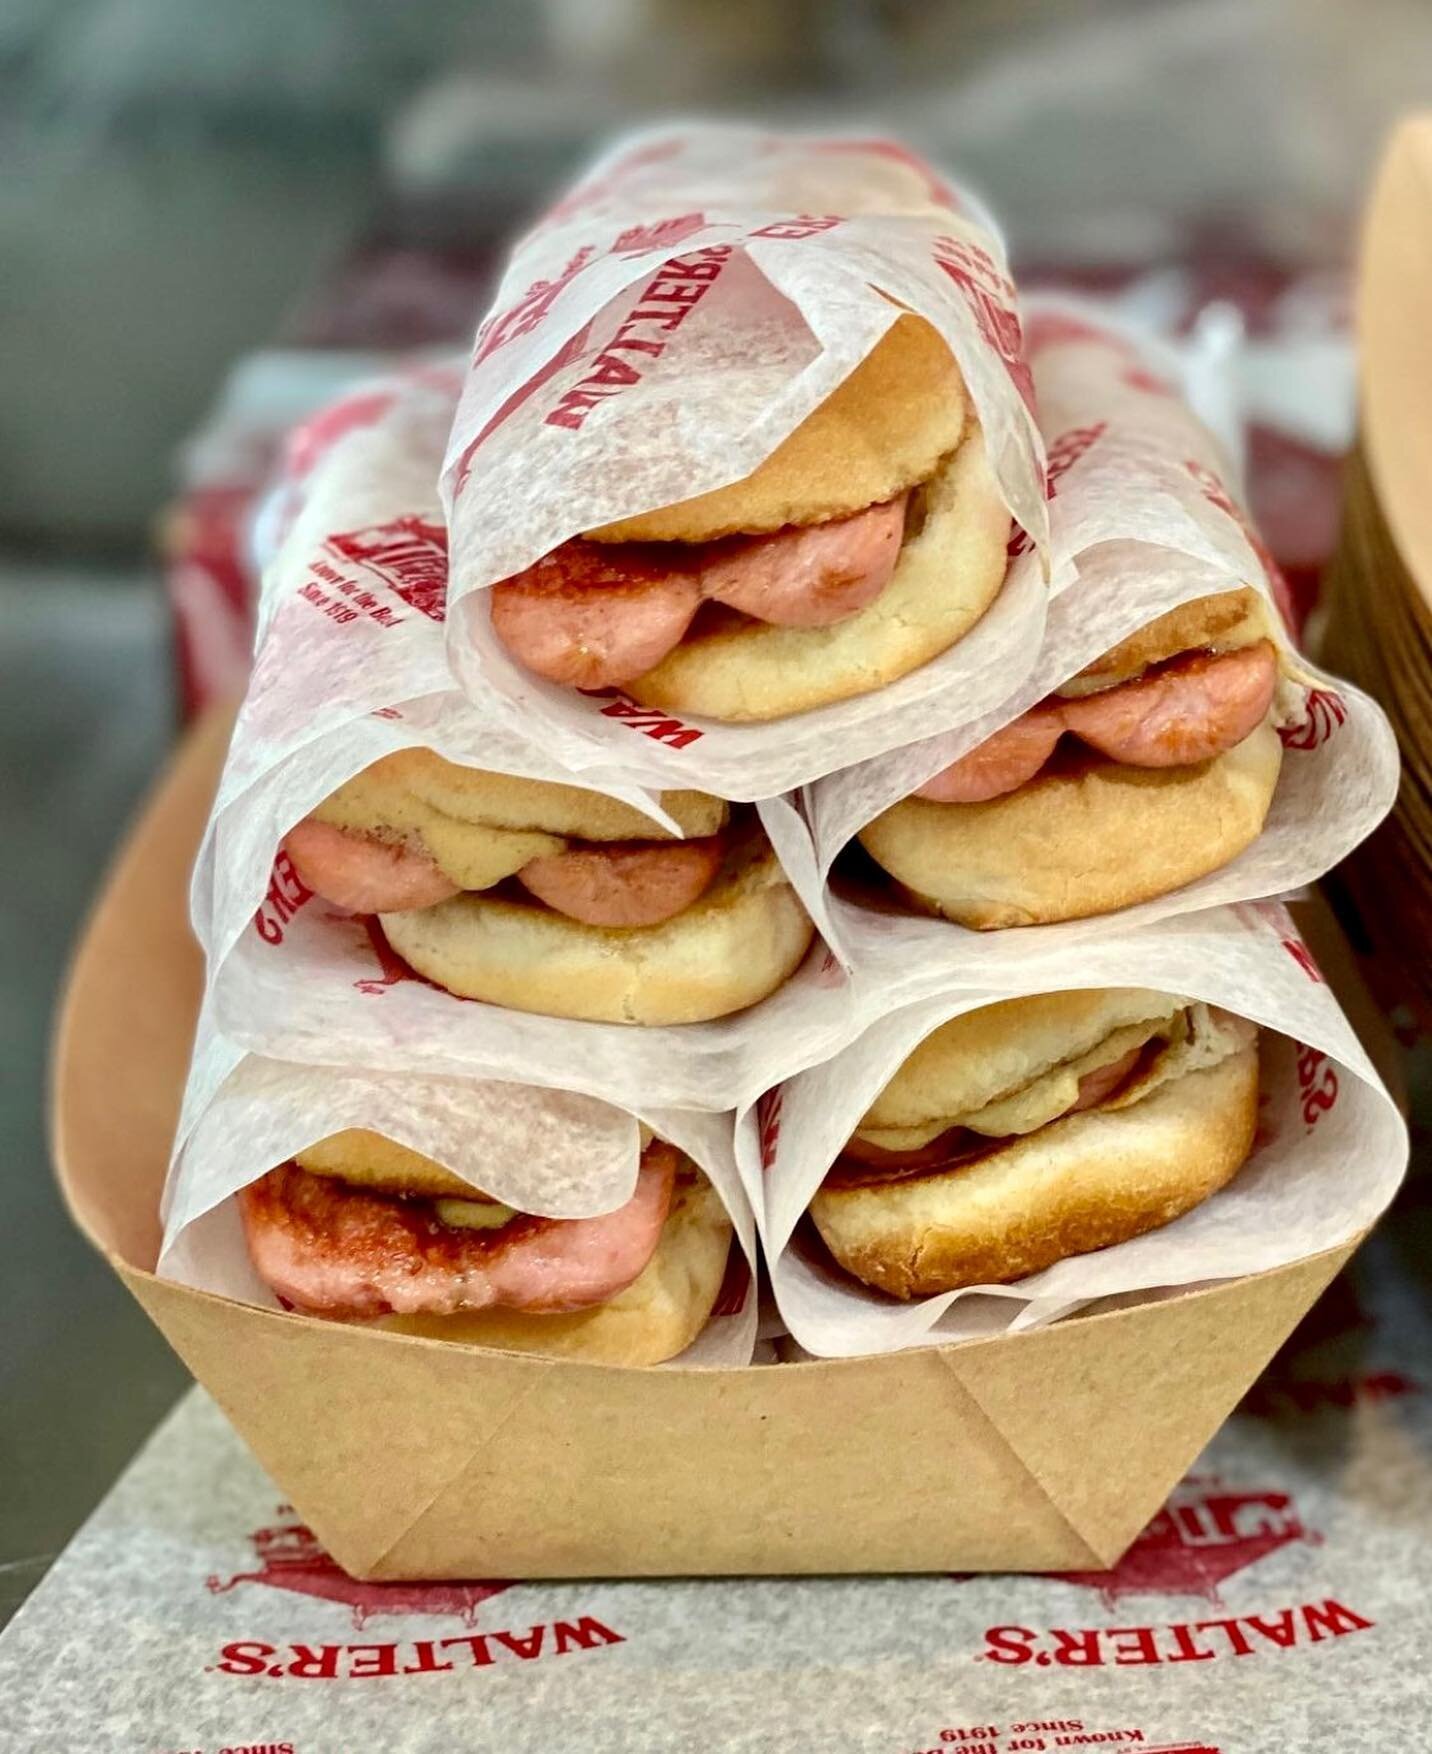 Stacked &amp; ready for the weekend 😎

#waltershotdogs #since1919 #summer #2022 #nyc #weekend #lunch #dinner #hotdogs #westchester #ny